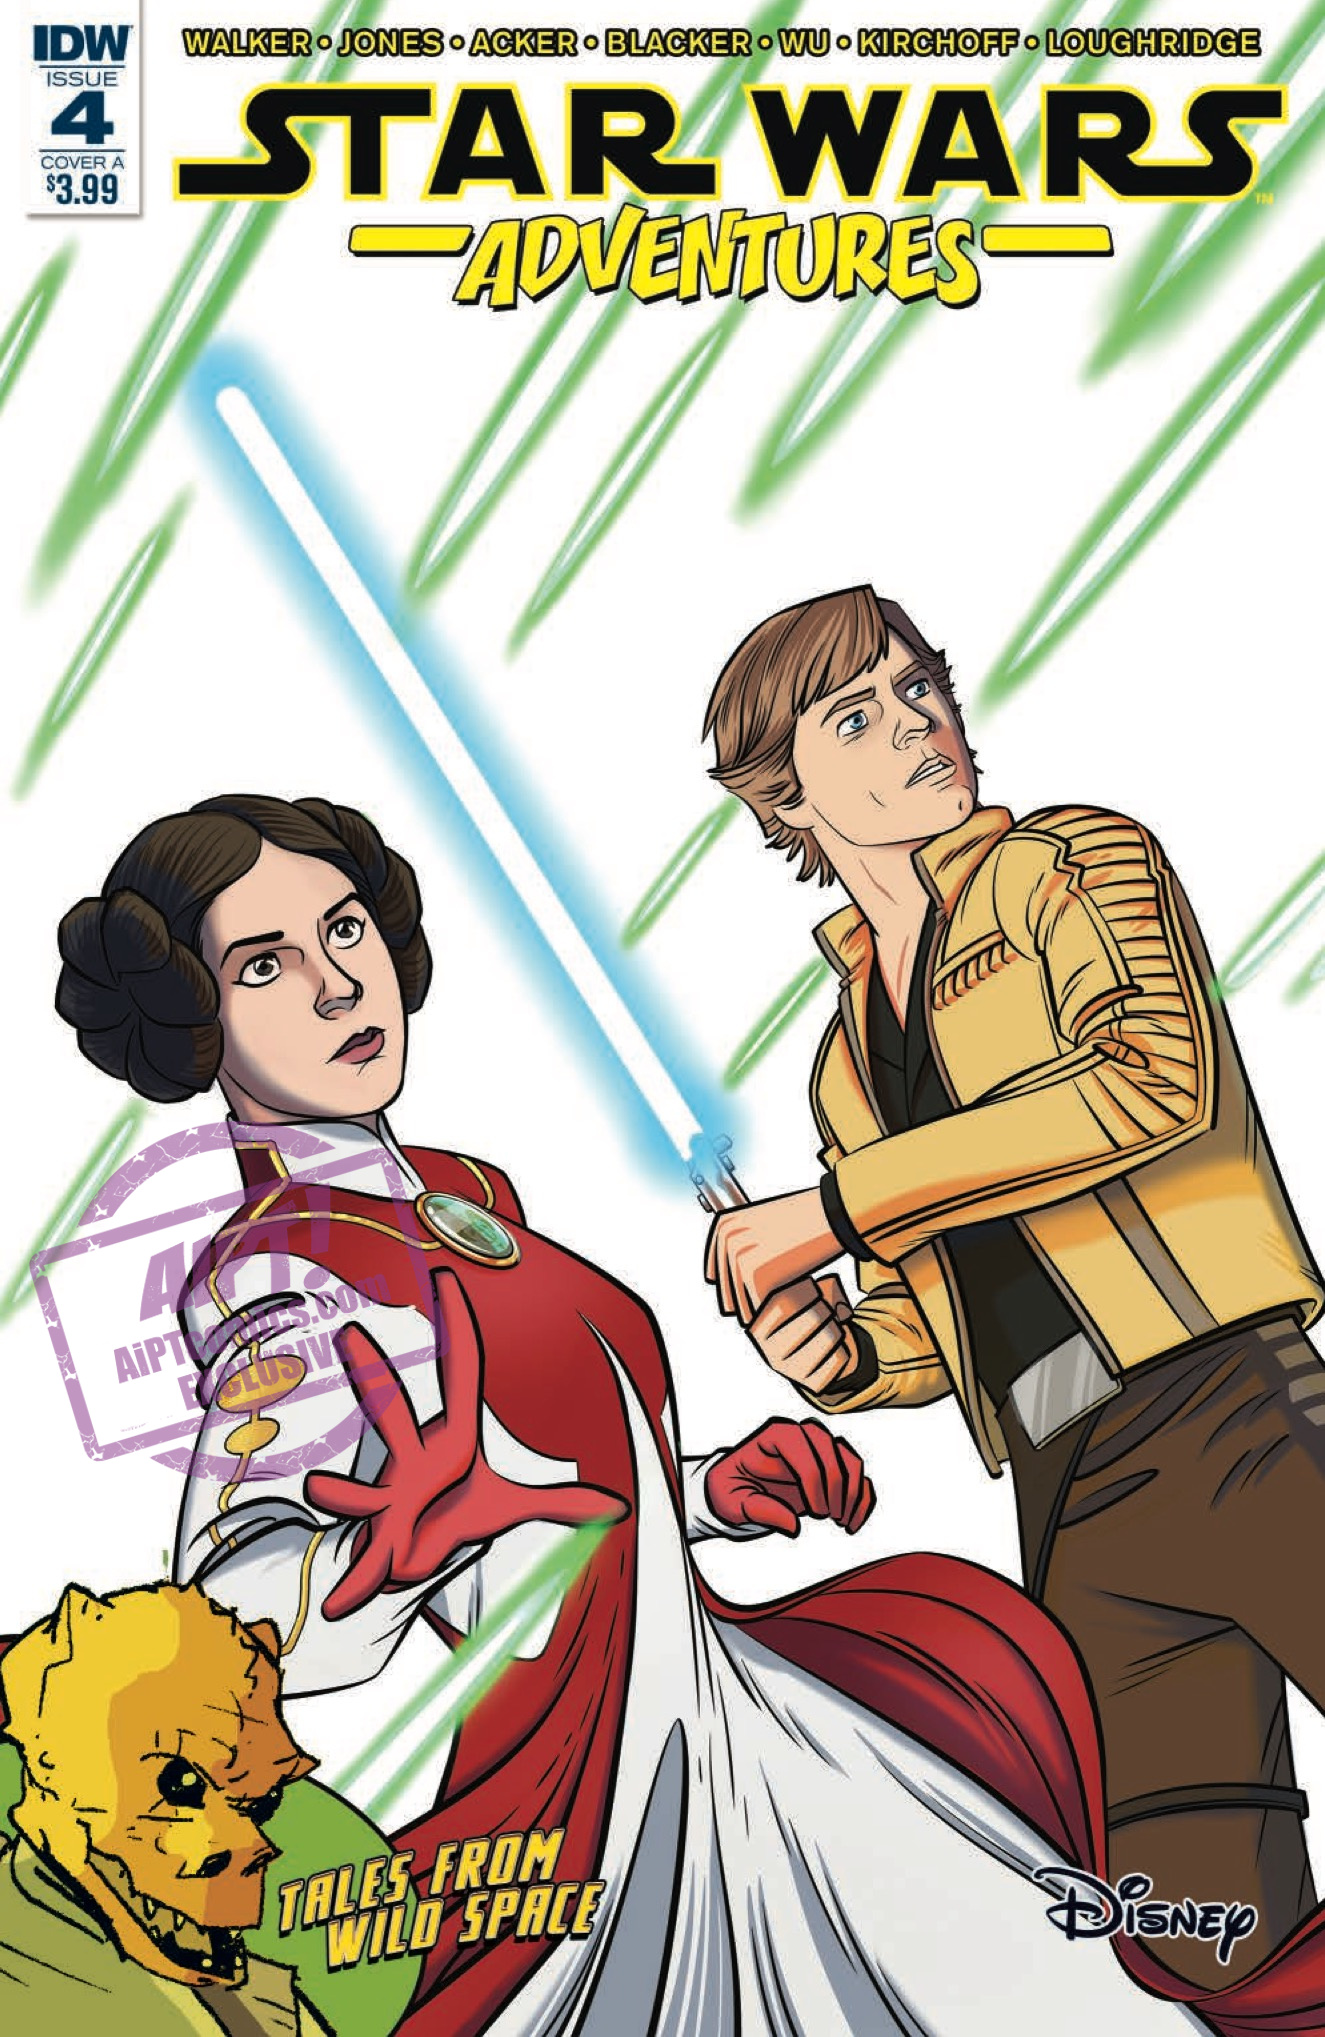 [EXCLUSIVE] IDW Preview: Star Wars Adventures #4